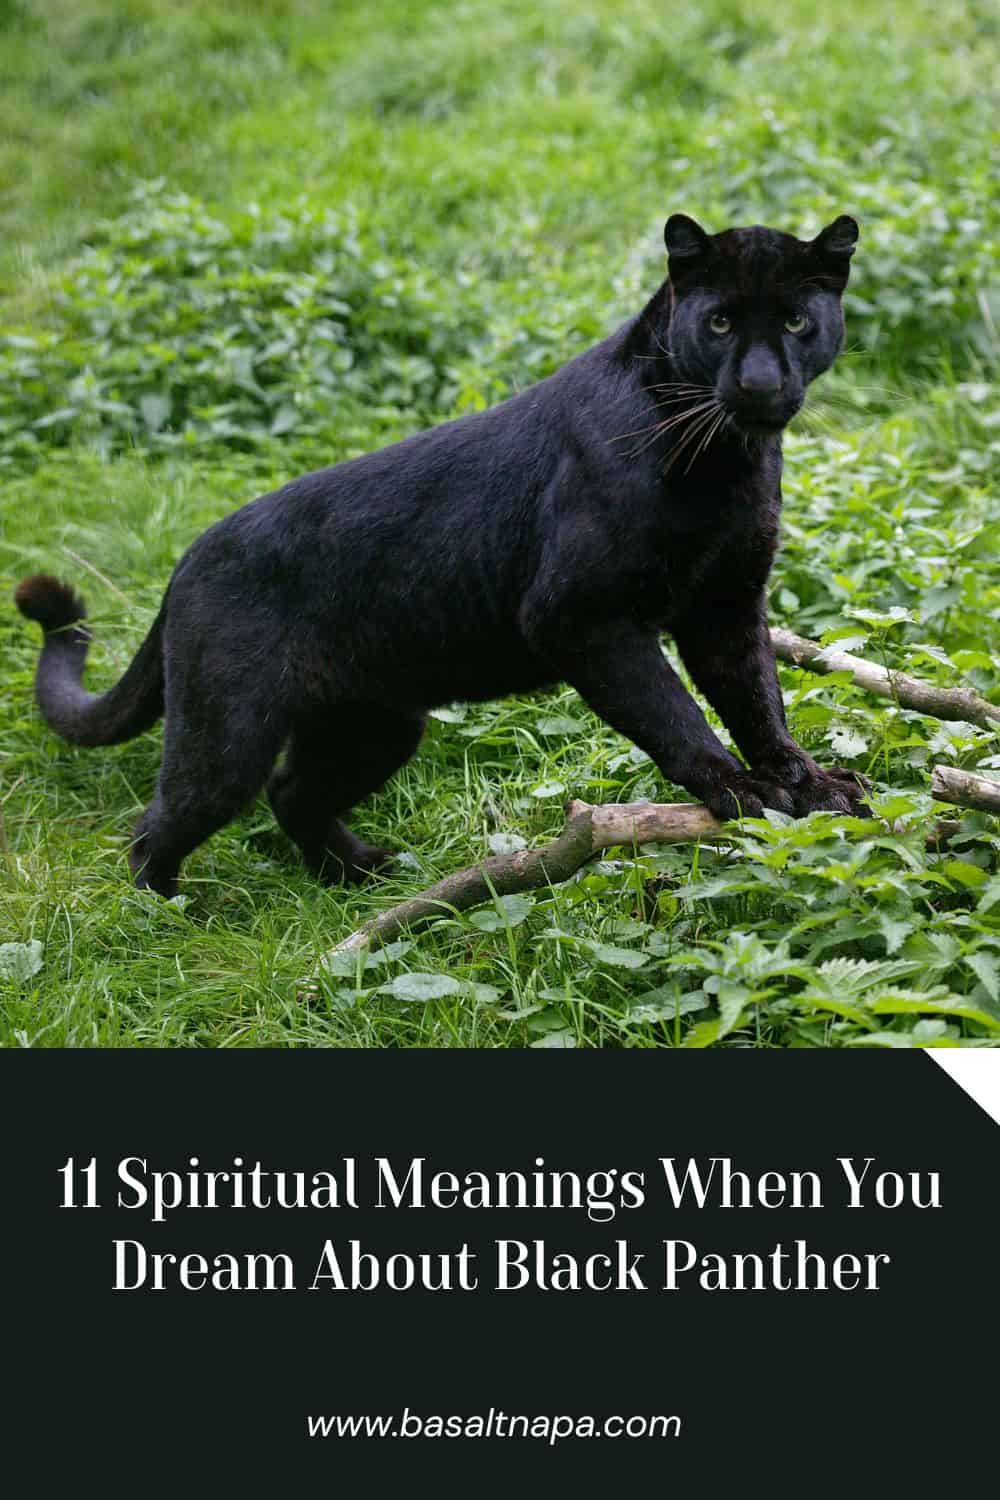 11 Spiritual Meanings When You Dream About Black Panther